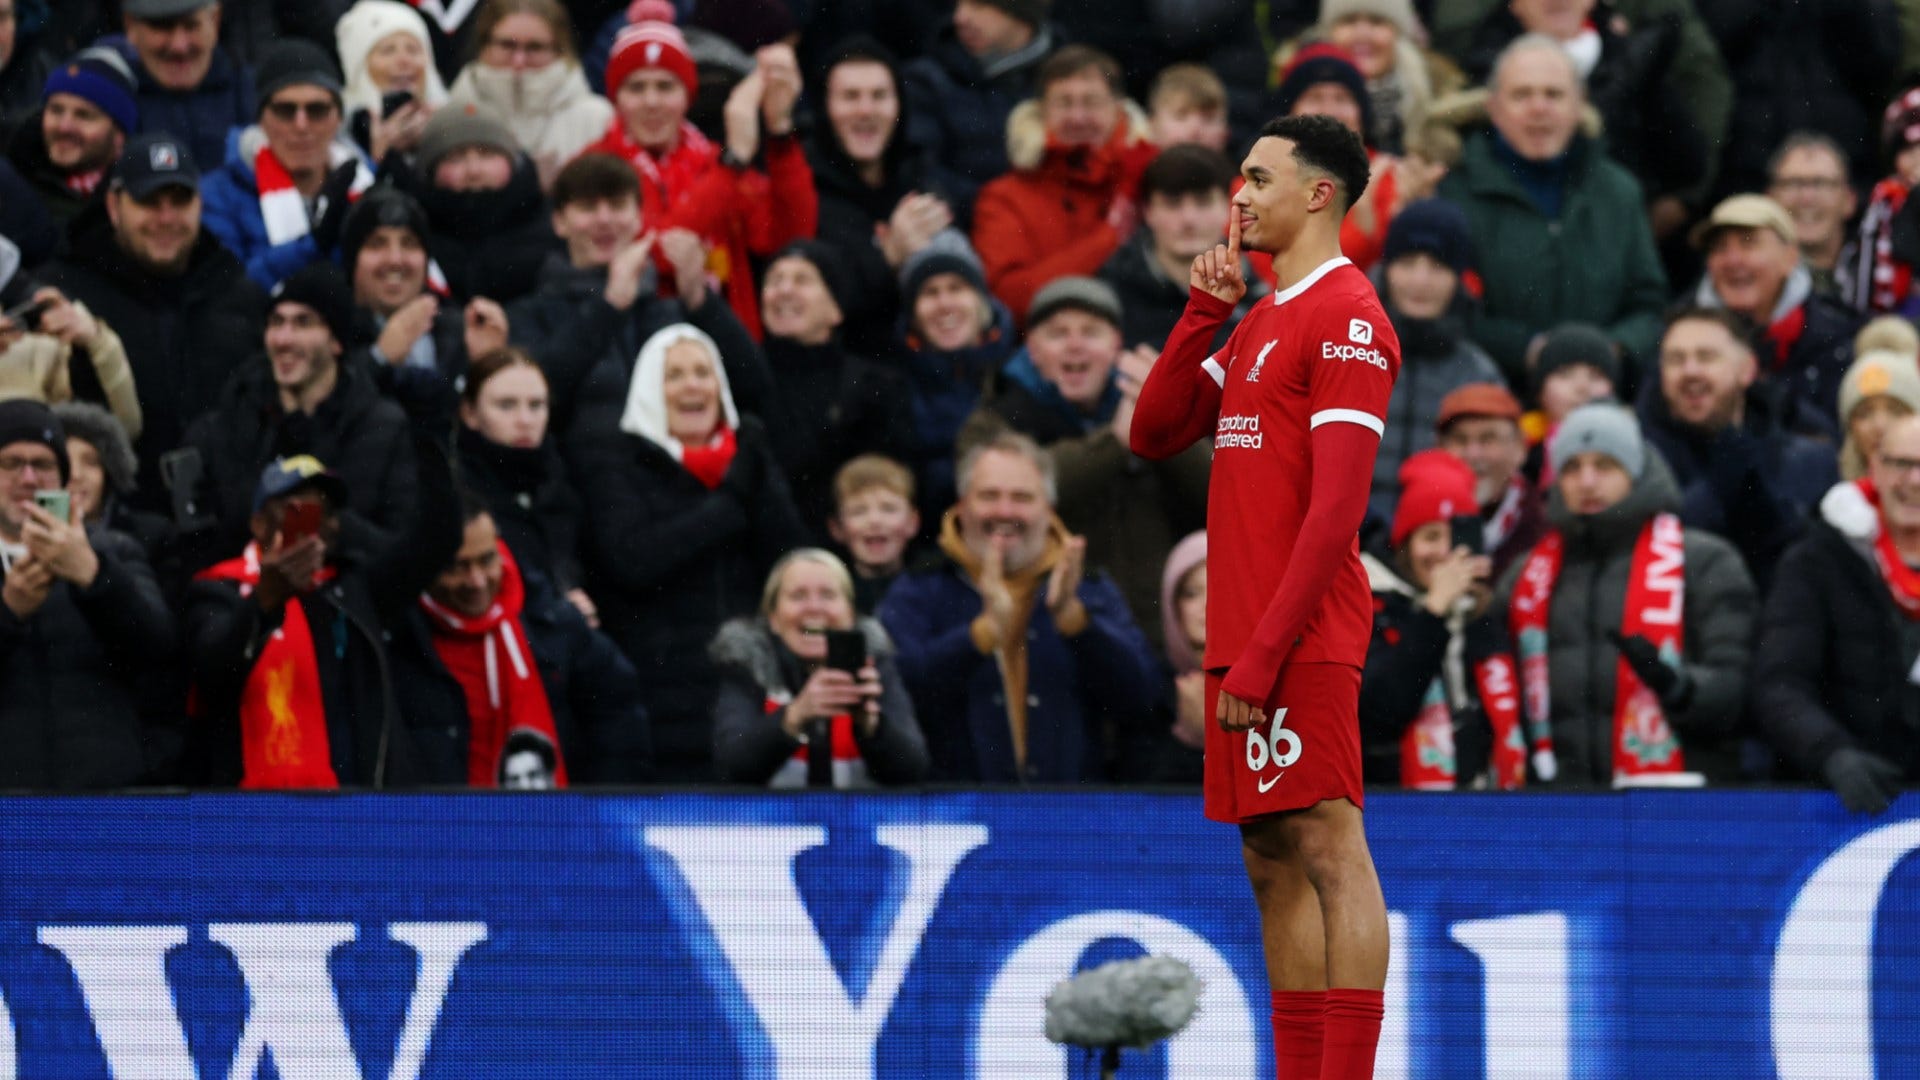 Explained: Why Liverpool star Trent Alexander-Arnold was NOT awarded a goal despite free-kick screamer against Fulham